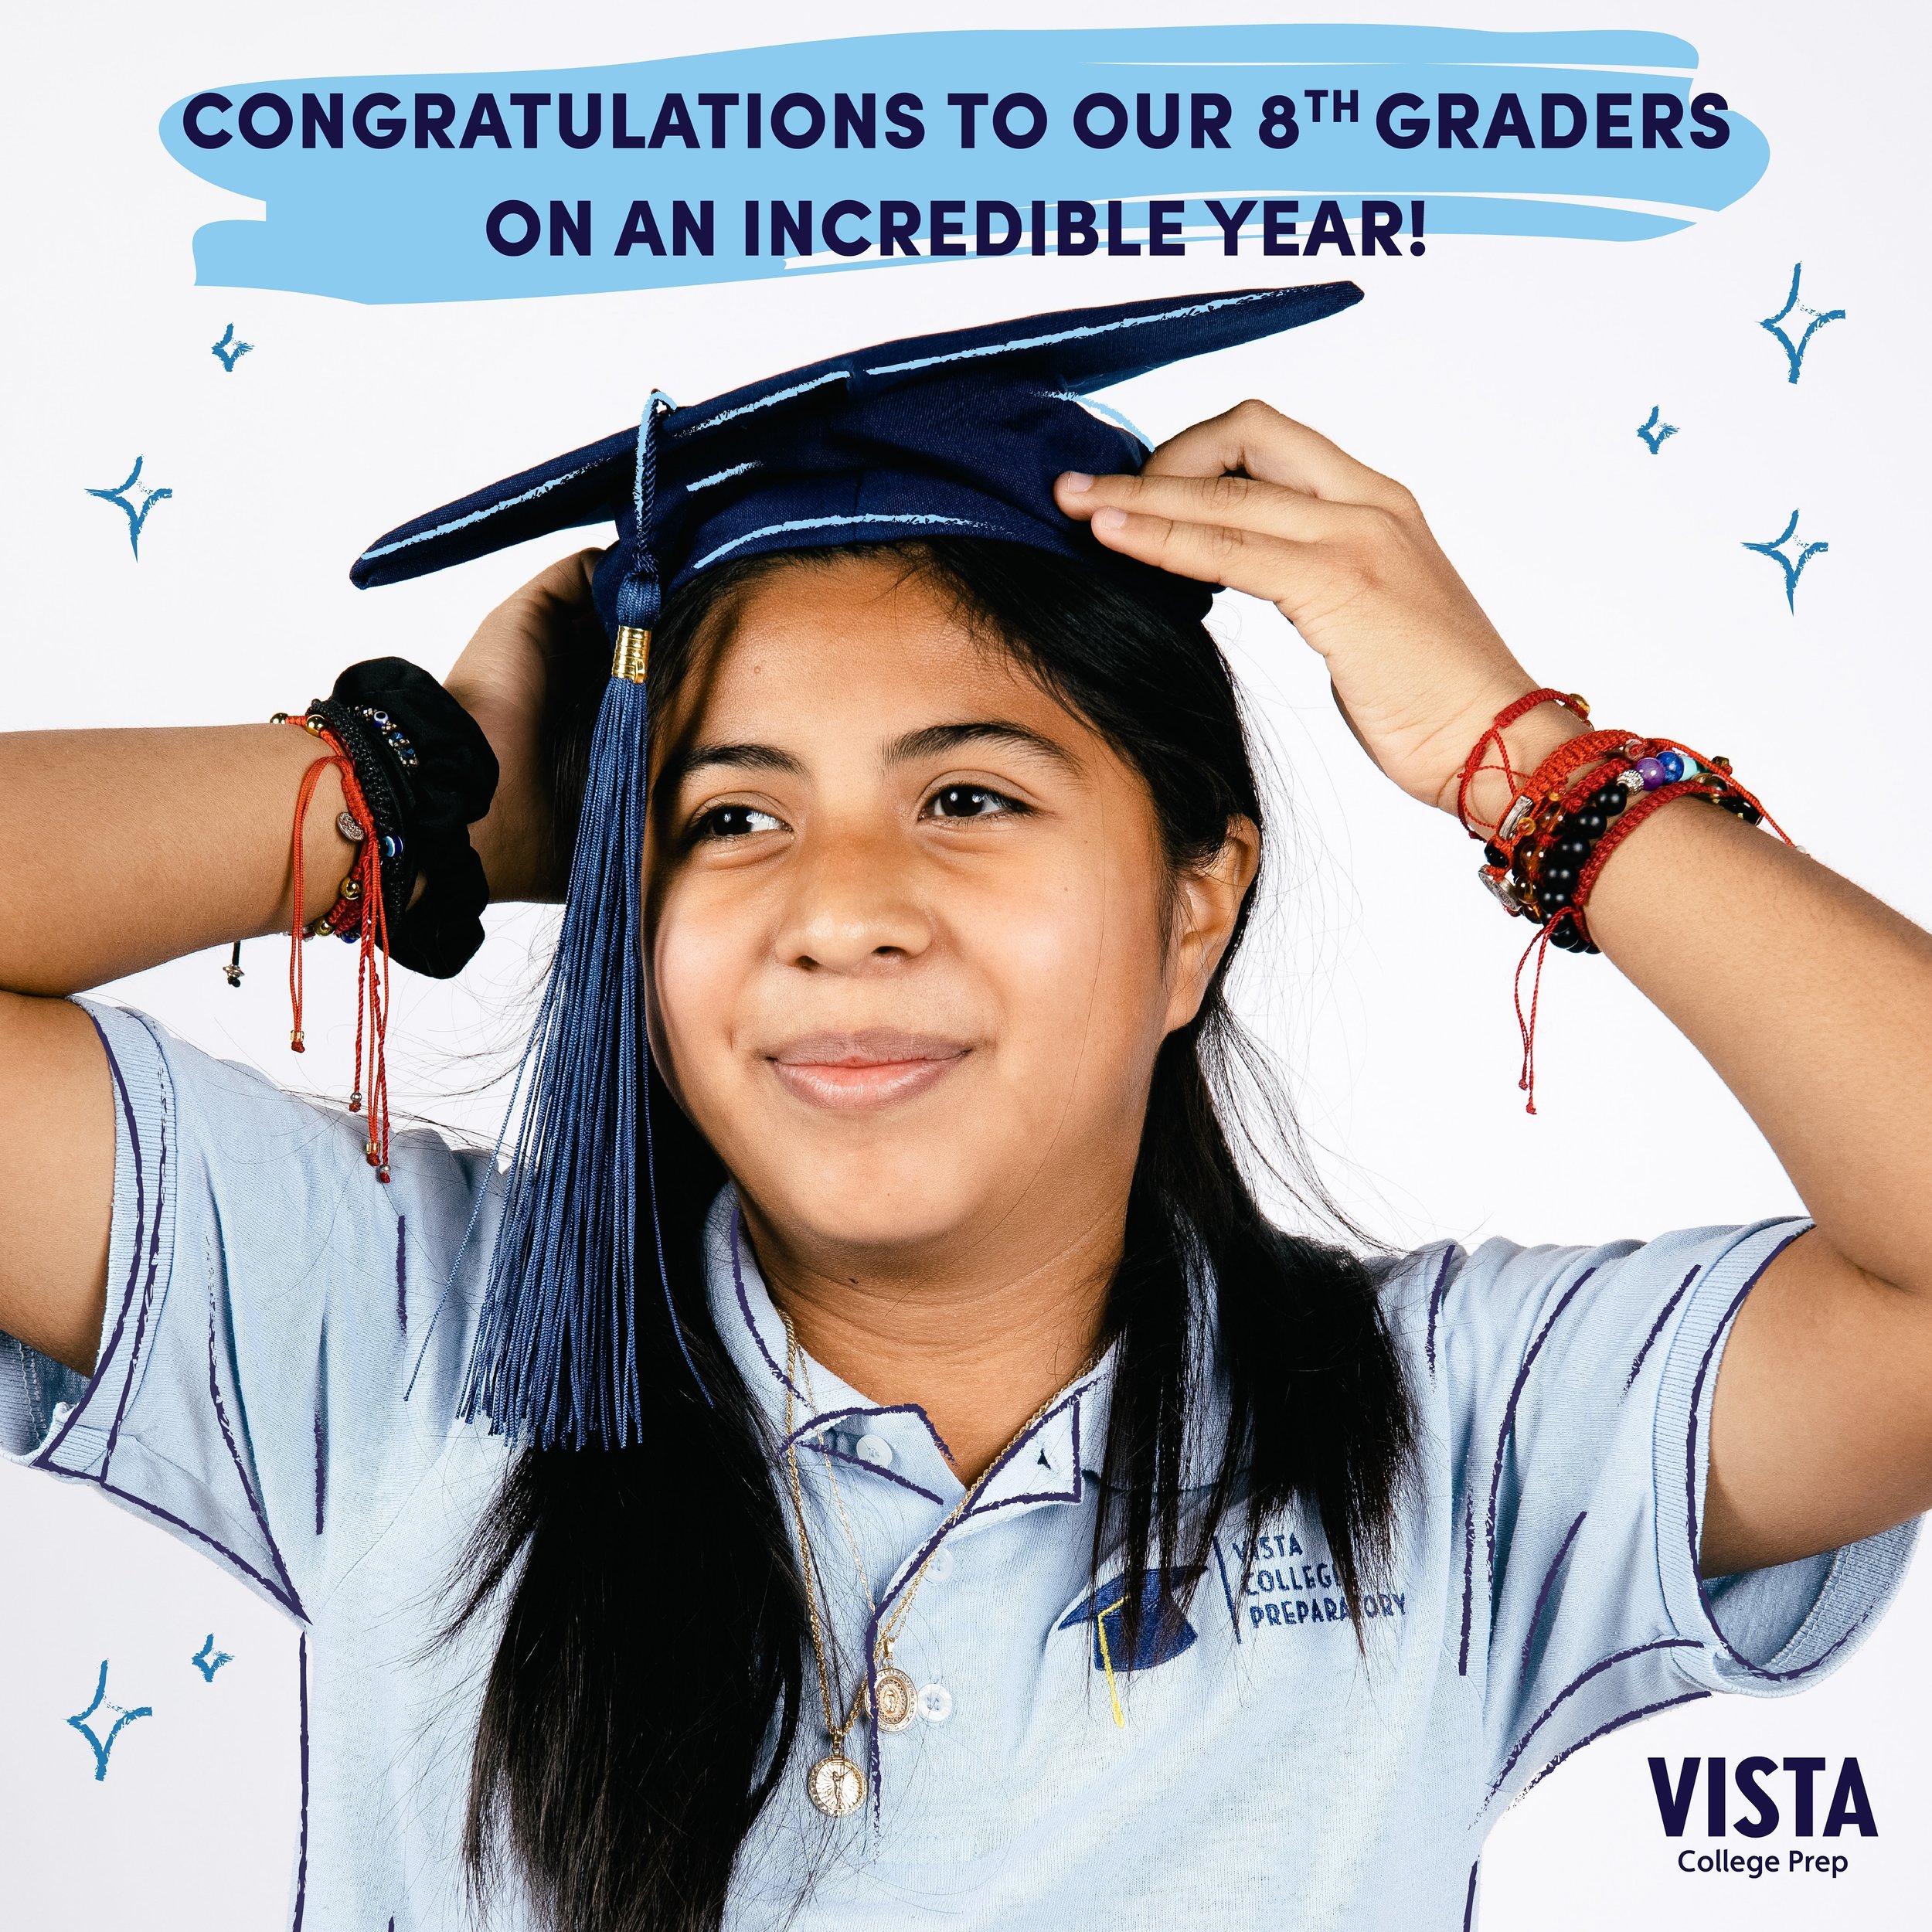 Congratulations to our 8th graders on an incredible year! Soak in the final month of school with your fellow Voyagers as these are memories you will have forever! | Do you want to feature your graduating 8th grader on our social media? Send an email 